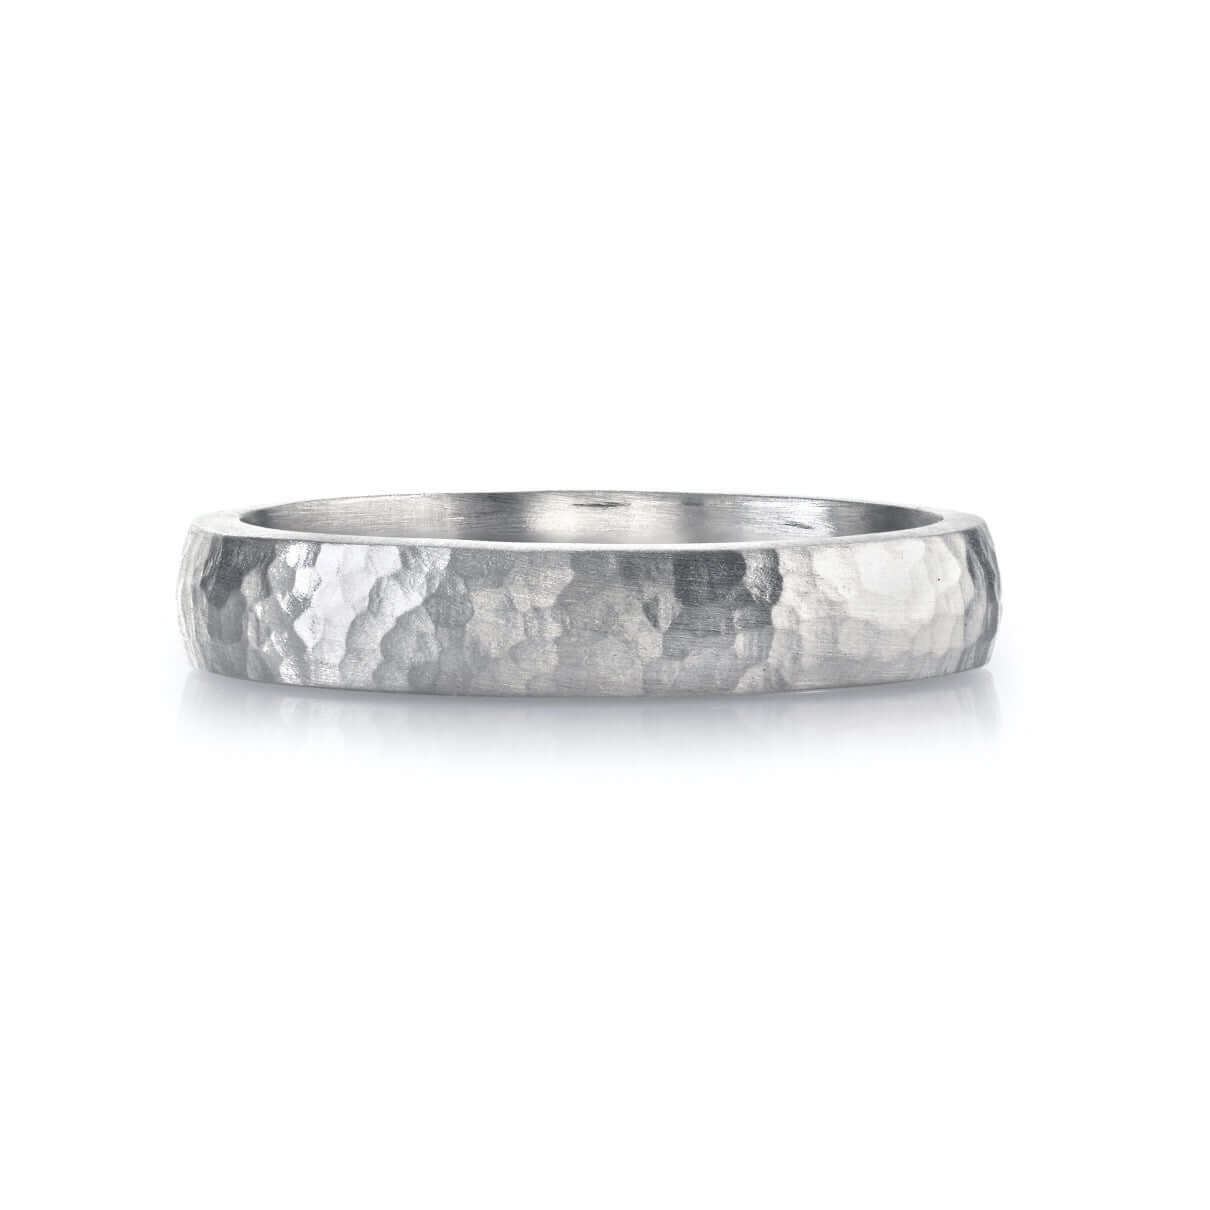 SINGLE STONE JOSEPH HAMMERED 4MM BAND | 4mm handcrafted hammered Men's band. Bands available from 4mm to 6mm.